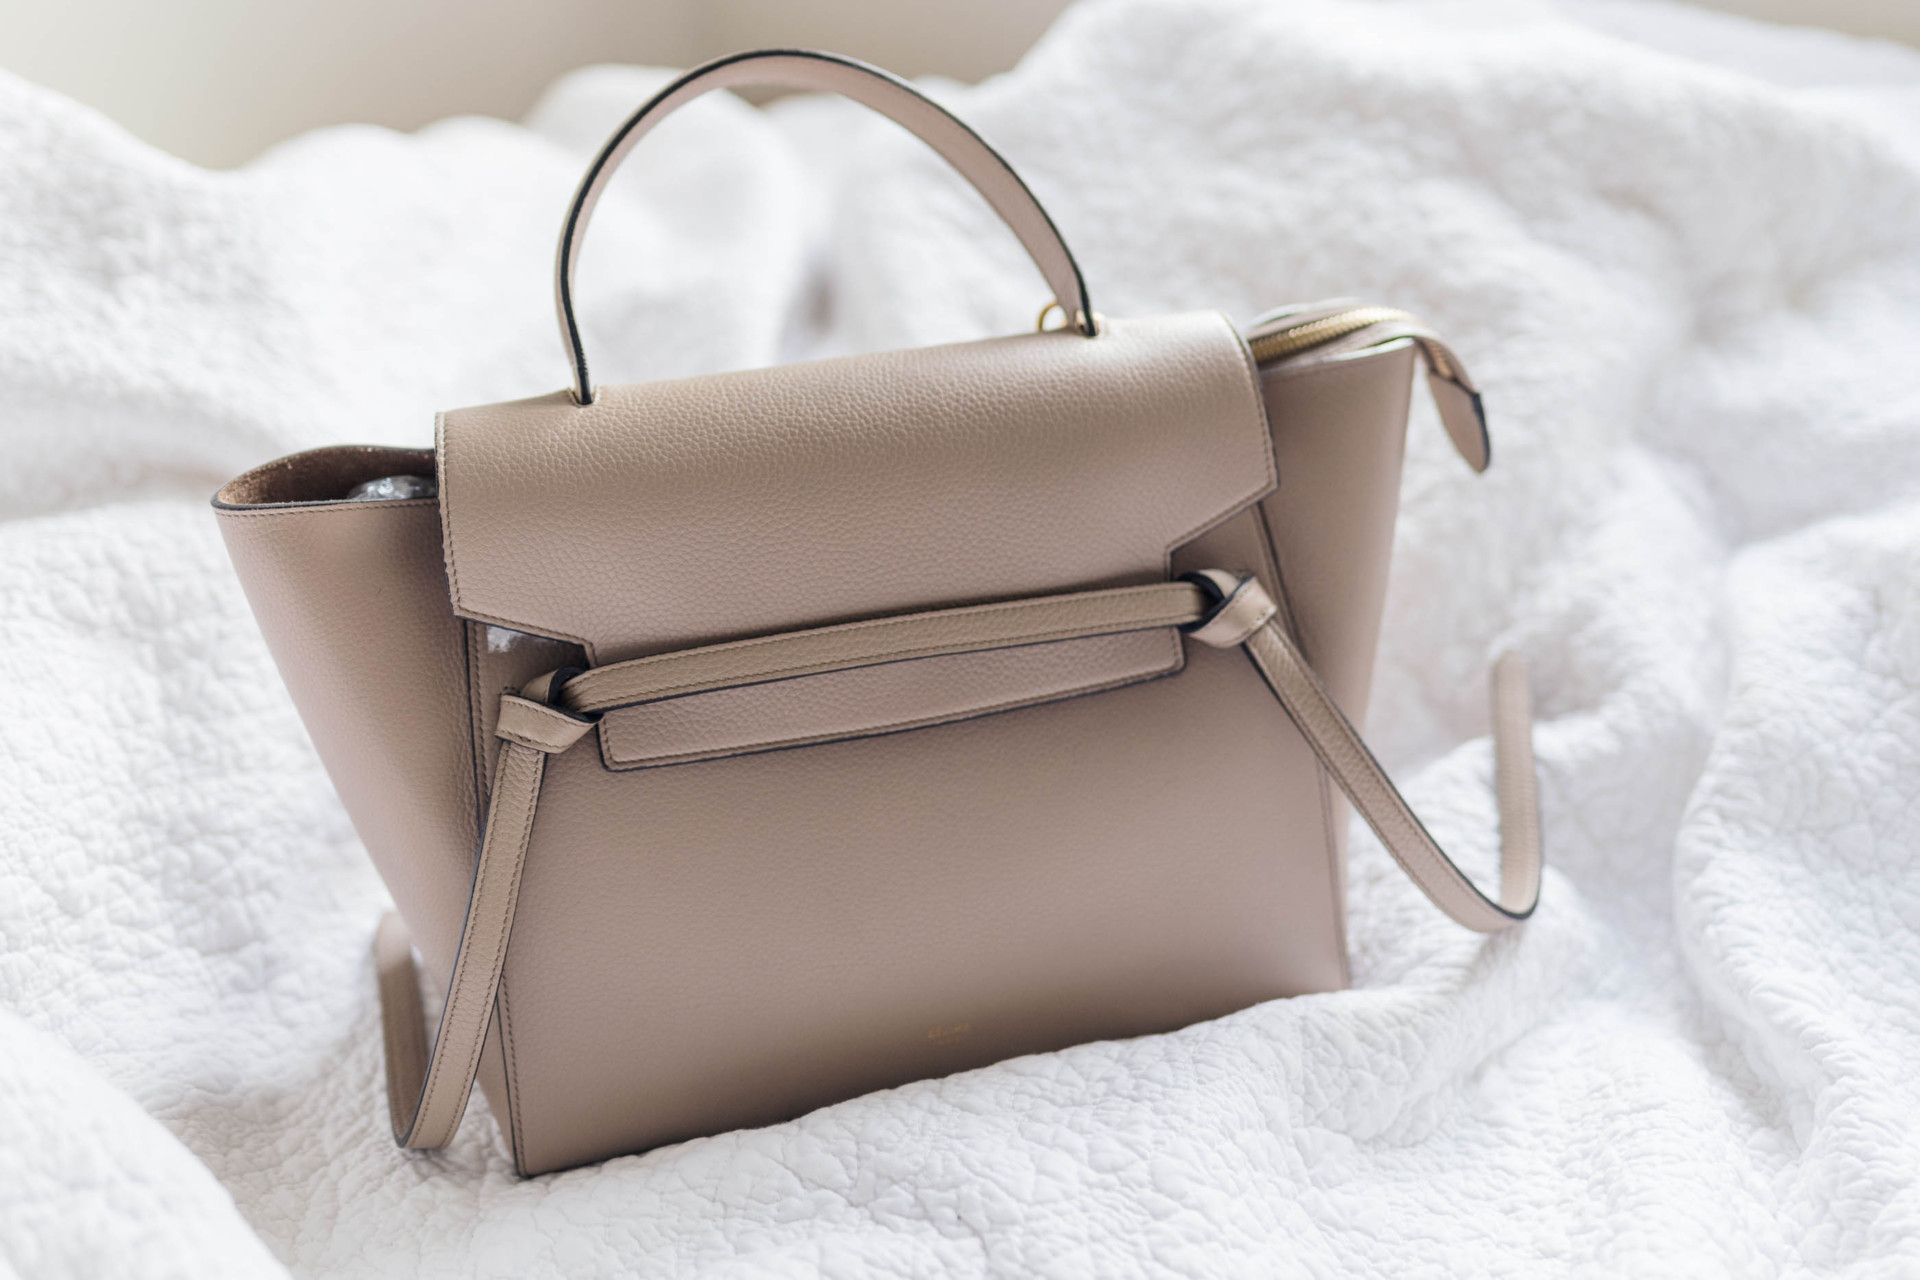 Celine Belt Bag Review  Celine belt bag, Belt bag, Beige outfit